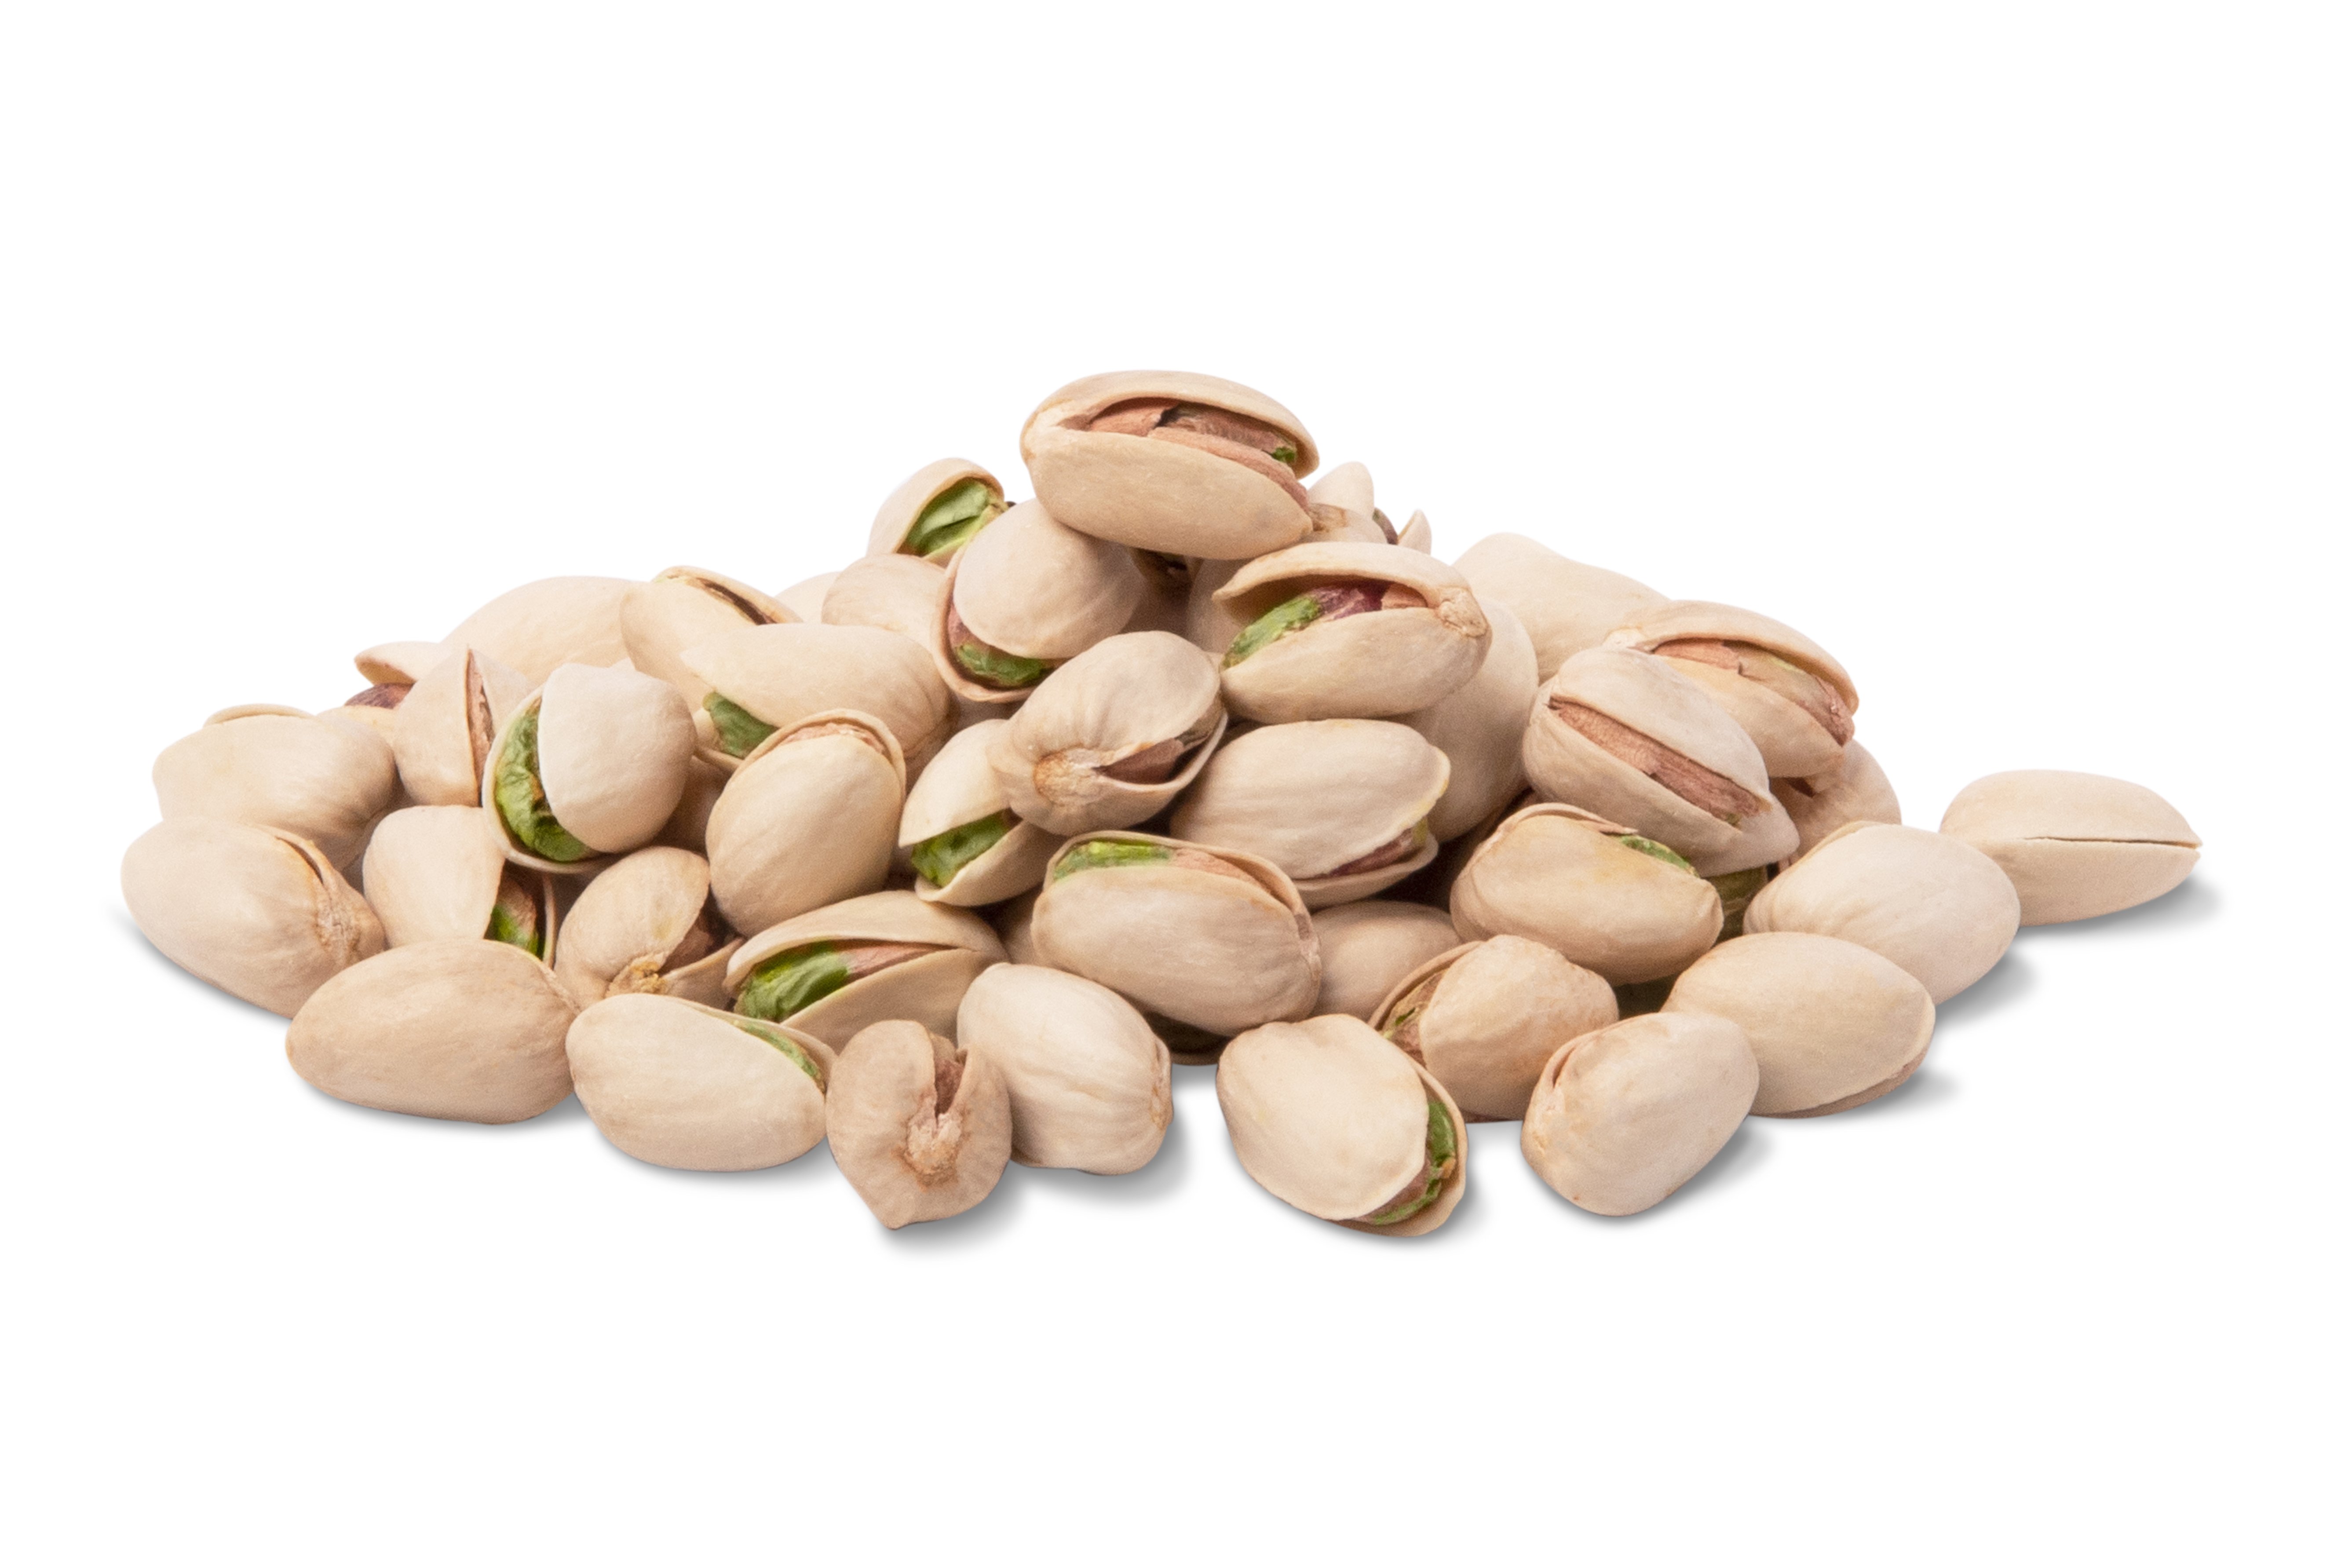 How to Make a Bowl Perfect for Serving Pistachio Nuts